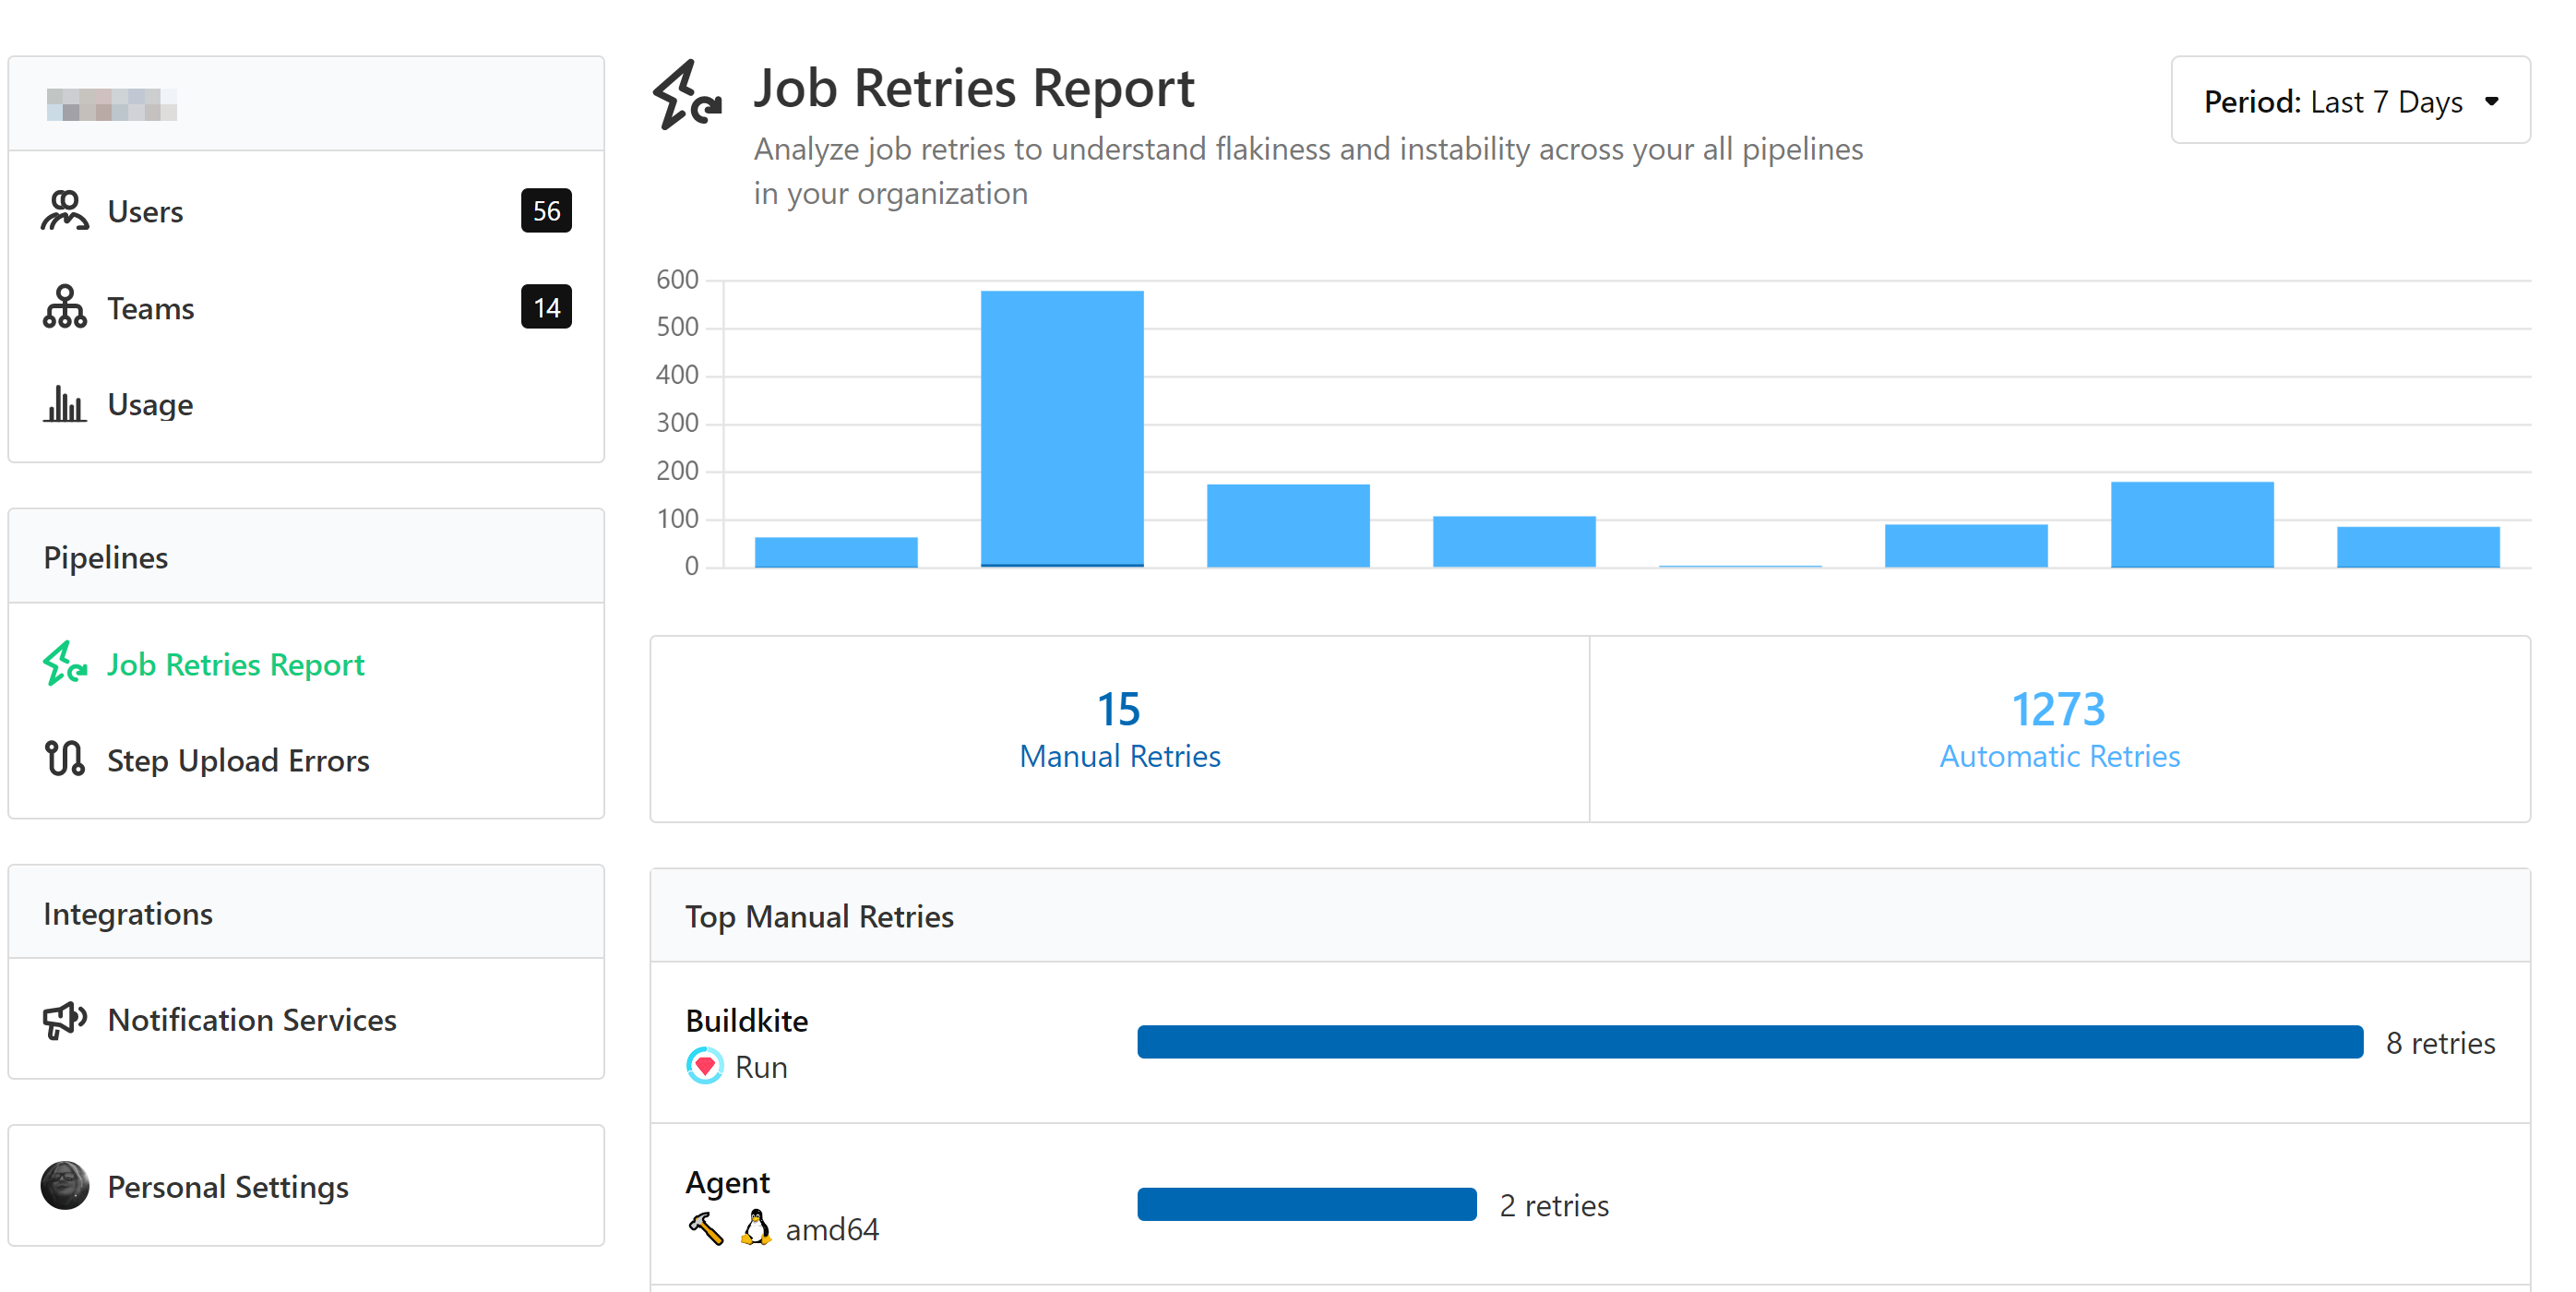 Information on manual and automatic job retries over the last 24 hours to 30 days 